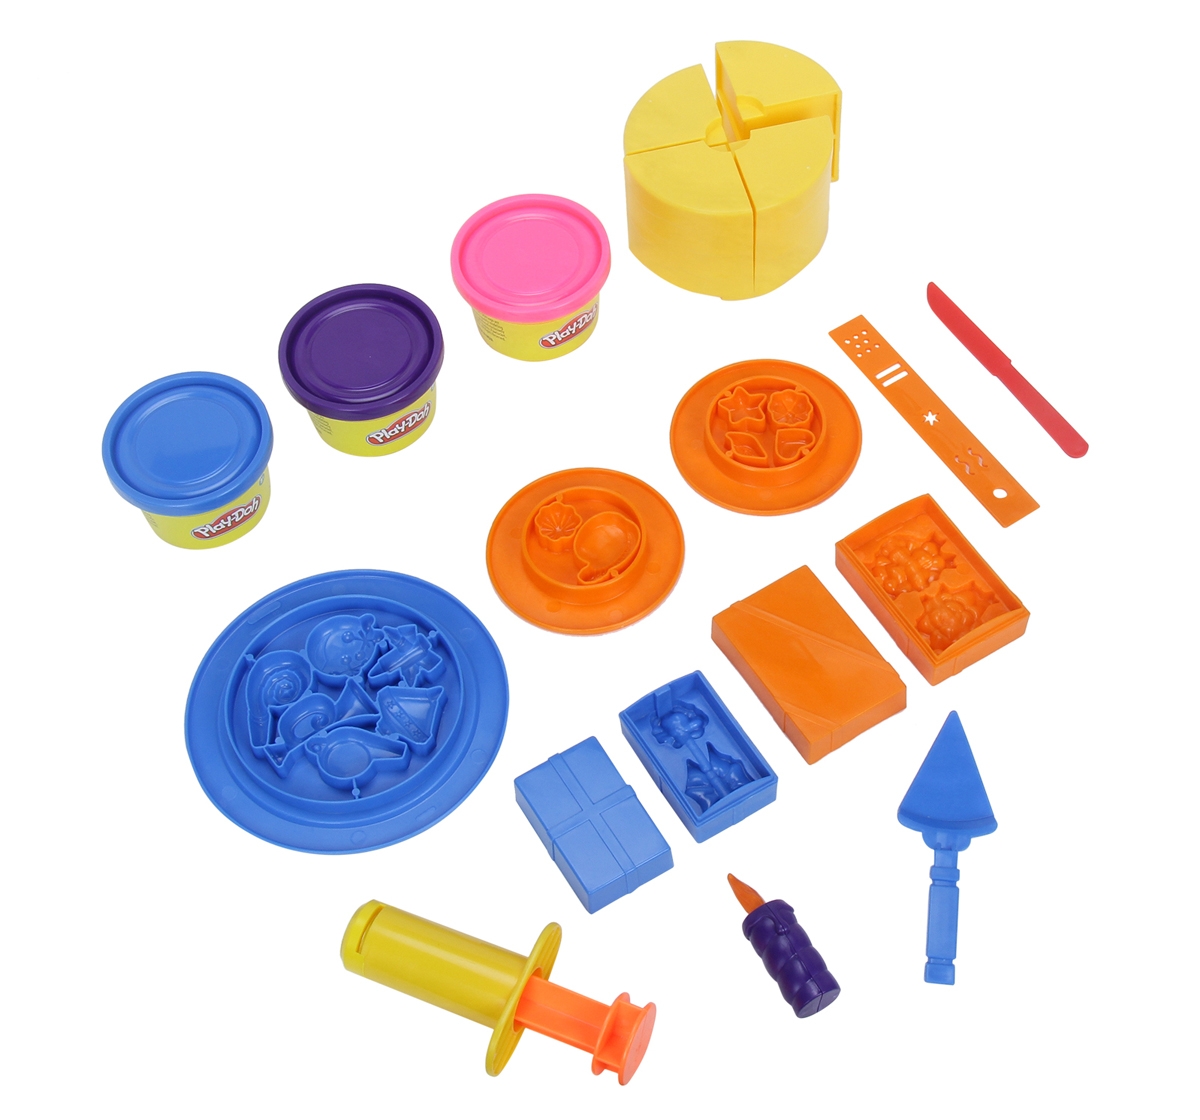 Play-Doh | Play Doh Birthday Fun Playset with 3 Non Toxic Play Doh Colors for Kids Multicolor 3Y+